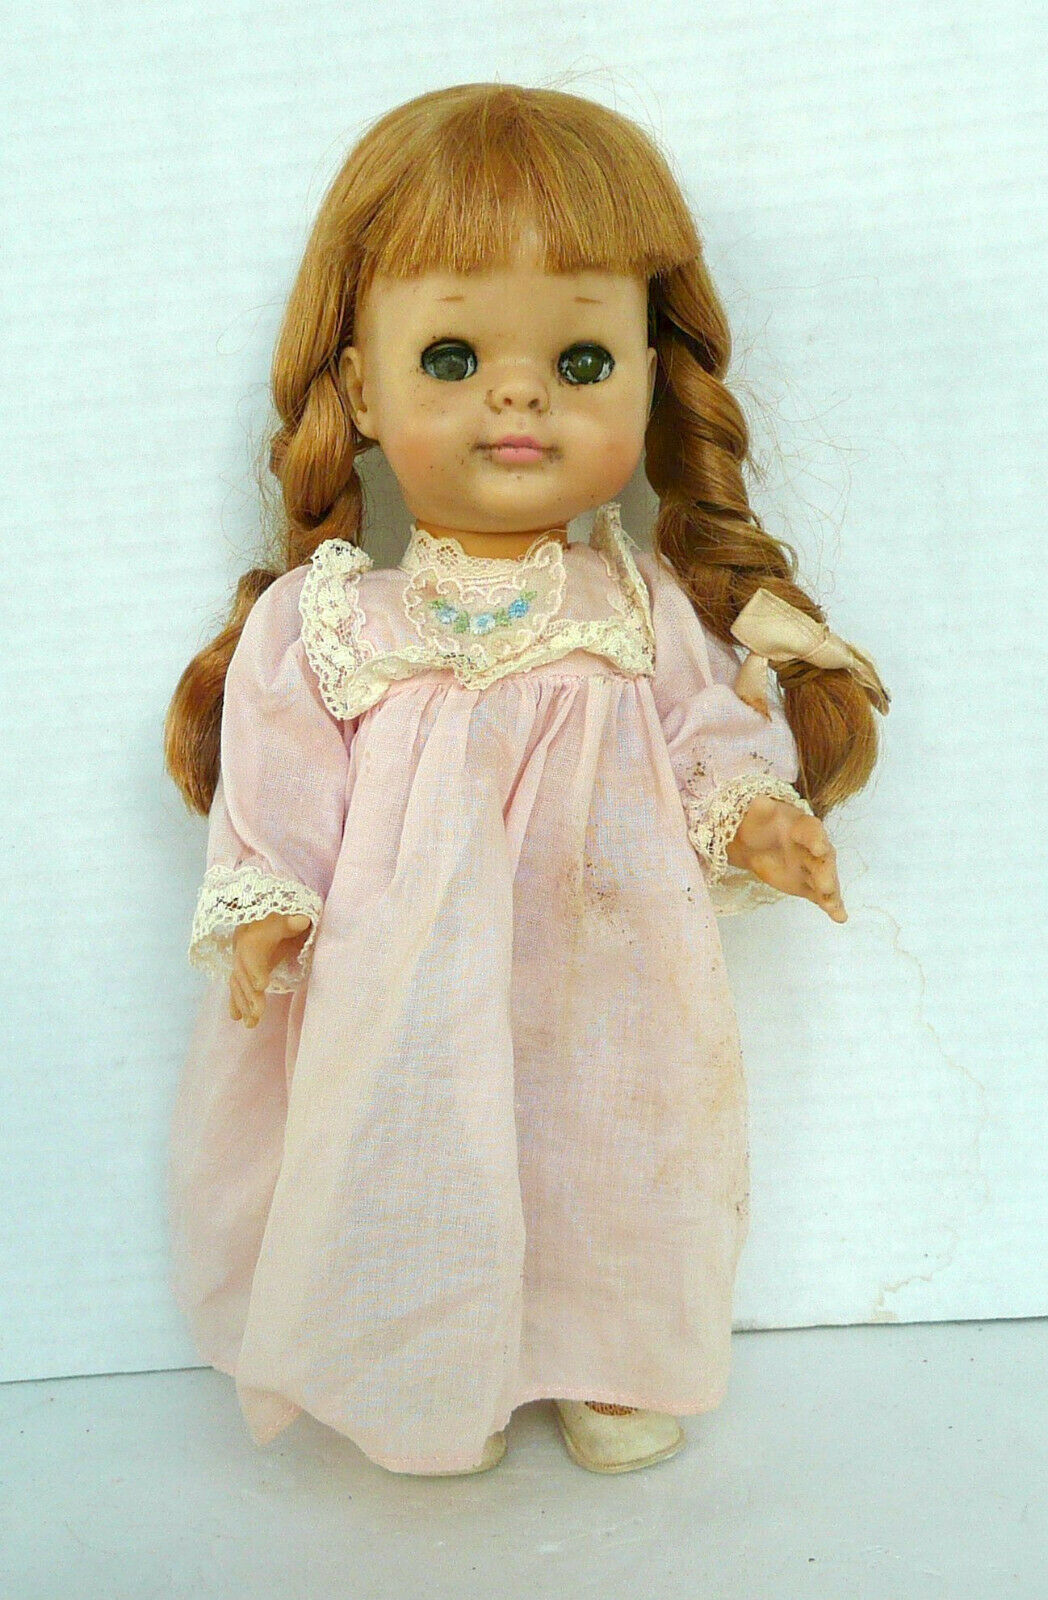 Vintage 1964 Vogue Doll Original Clothes Shoes Blond Sleep Eyes 11 '' Jointed